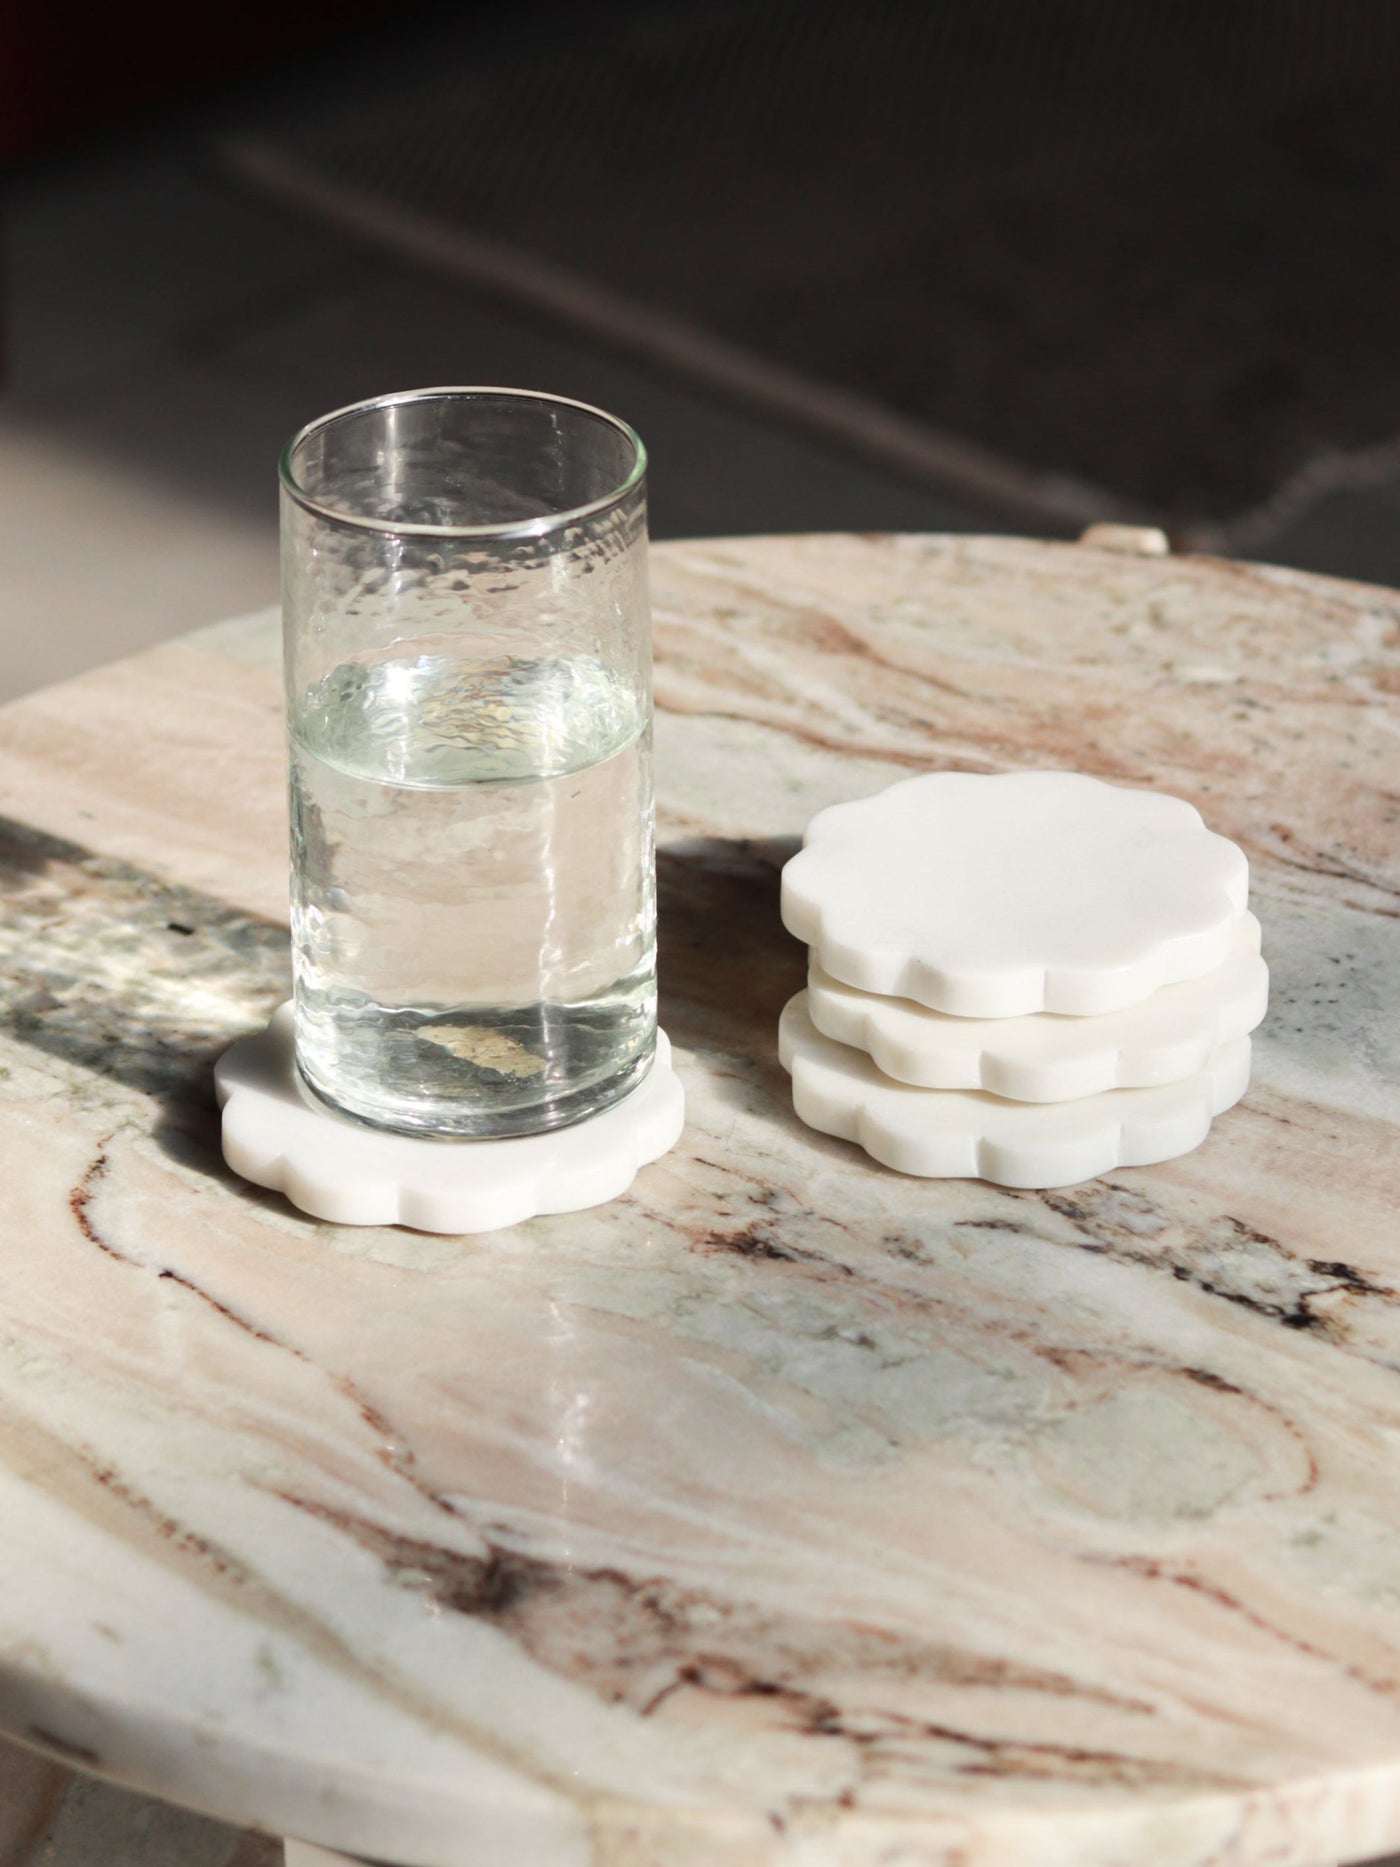 Scallop Marble Coasters